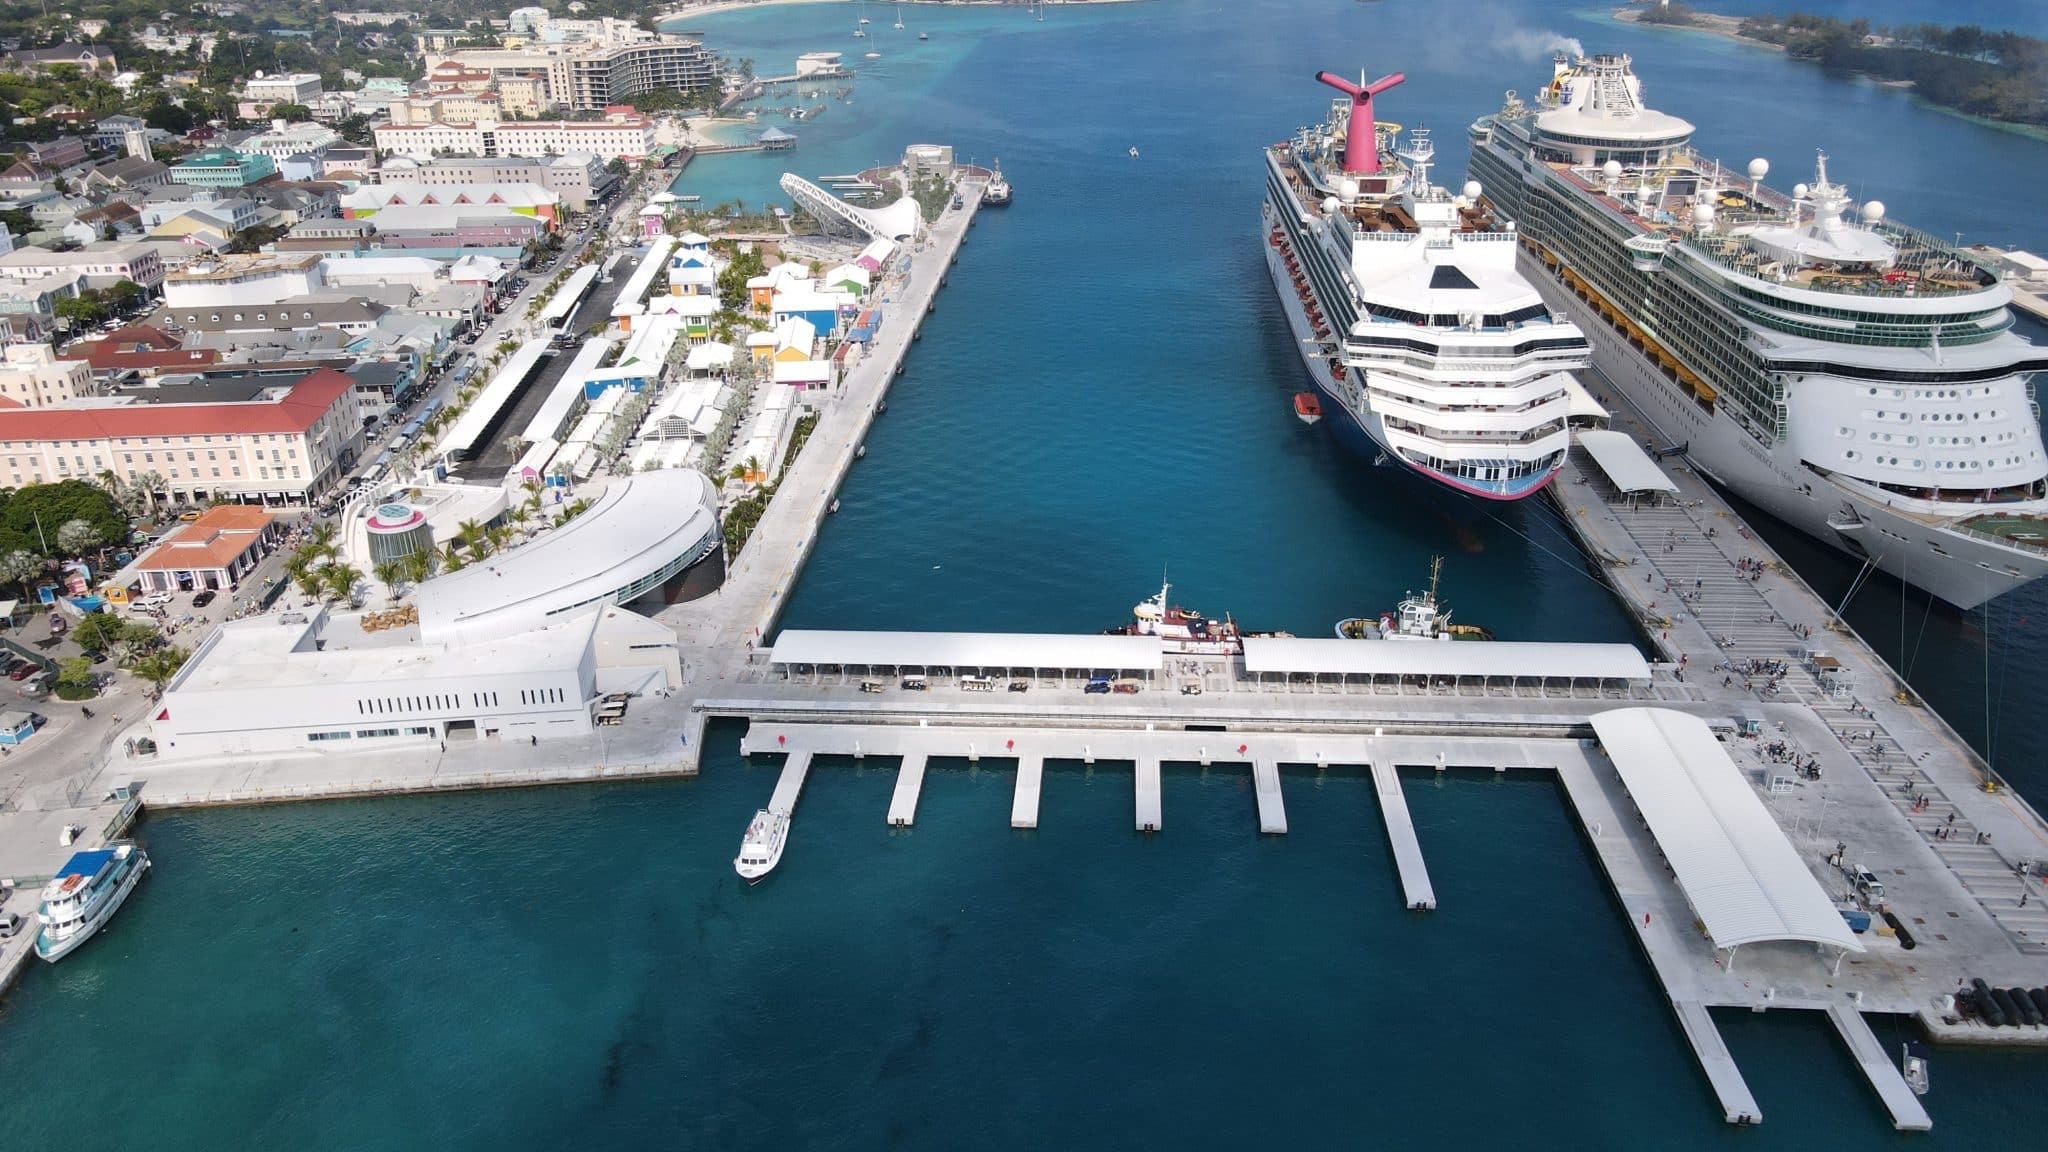 newly-reworked-cruise-port-in-nassau-opens-in-2-weeks-cruise-tourist